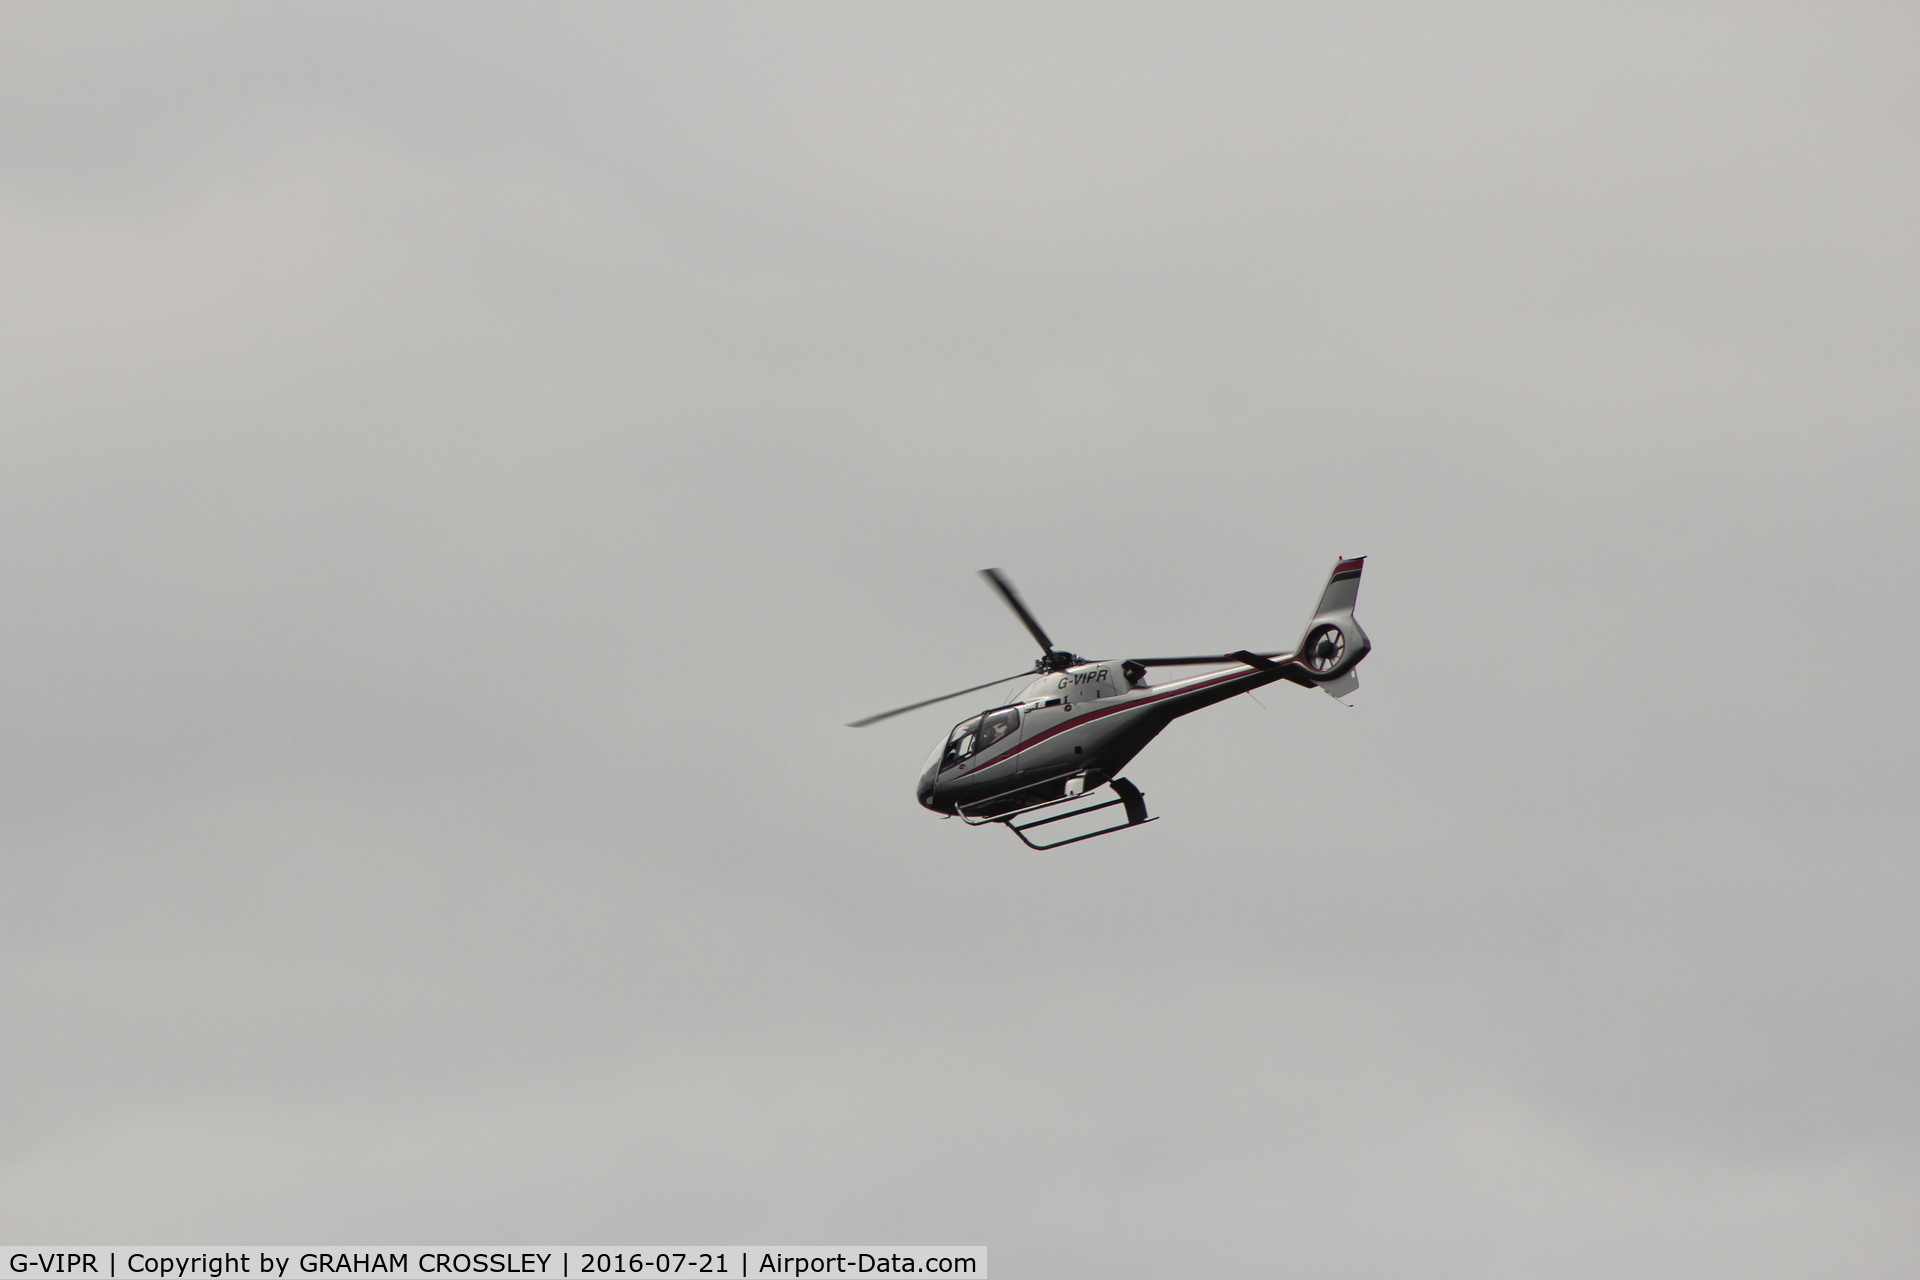 G-VIPR, 1998 Eurocopter EC-120B Colibri C/N 1049, Spotted over sarum airfield ..21.7.2016 14.21pm